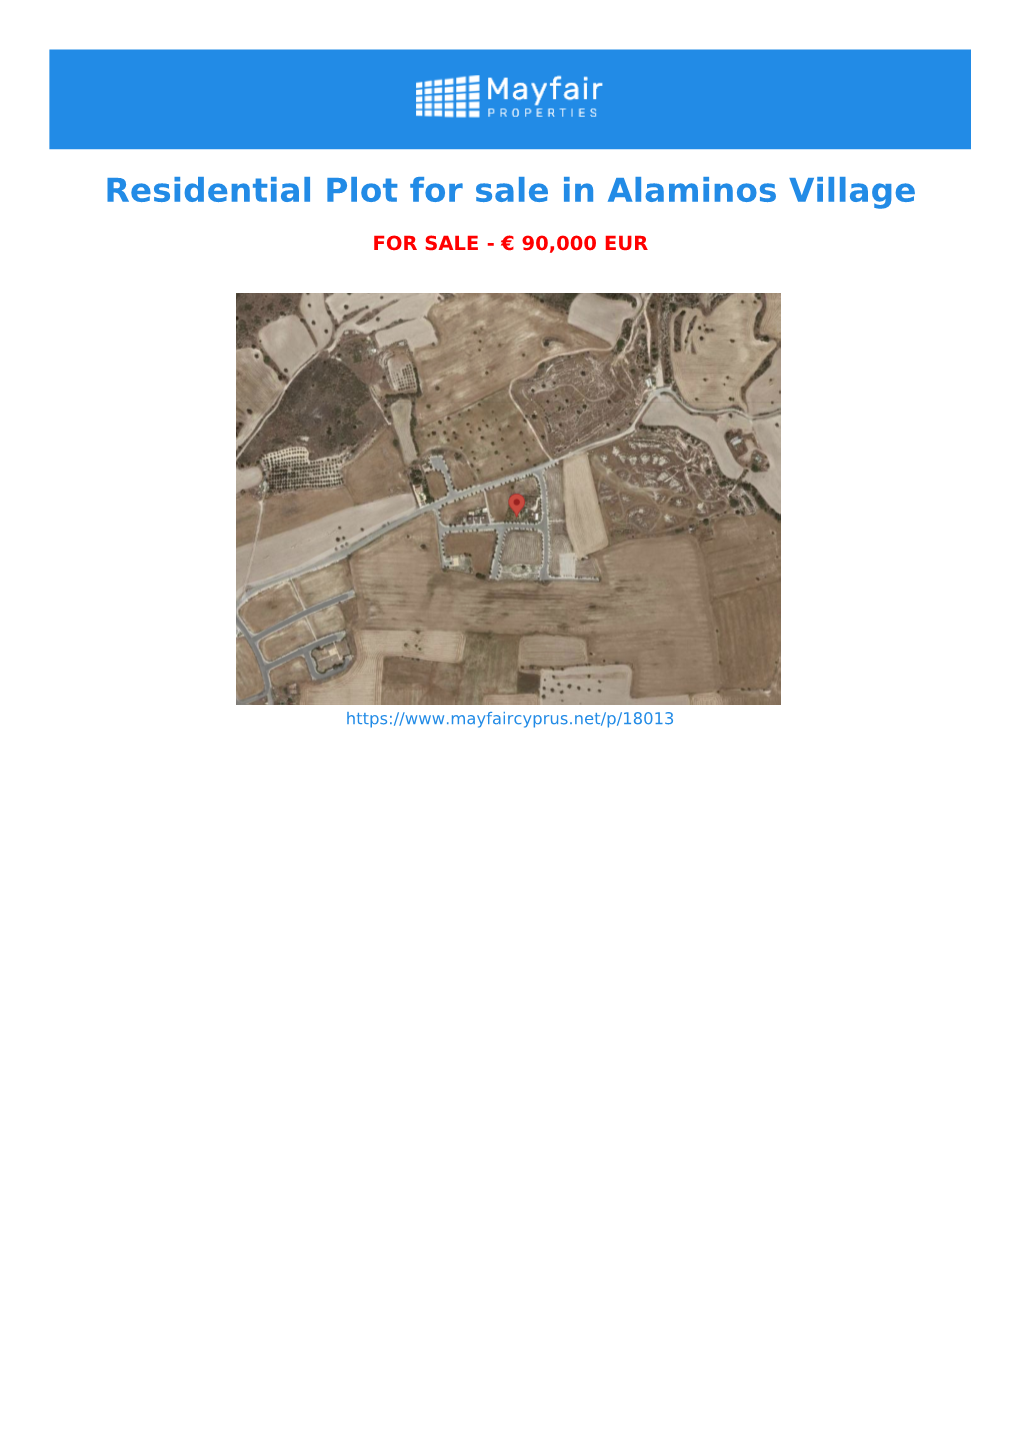 Residential Plot for Sale in Alaminos Village